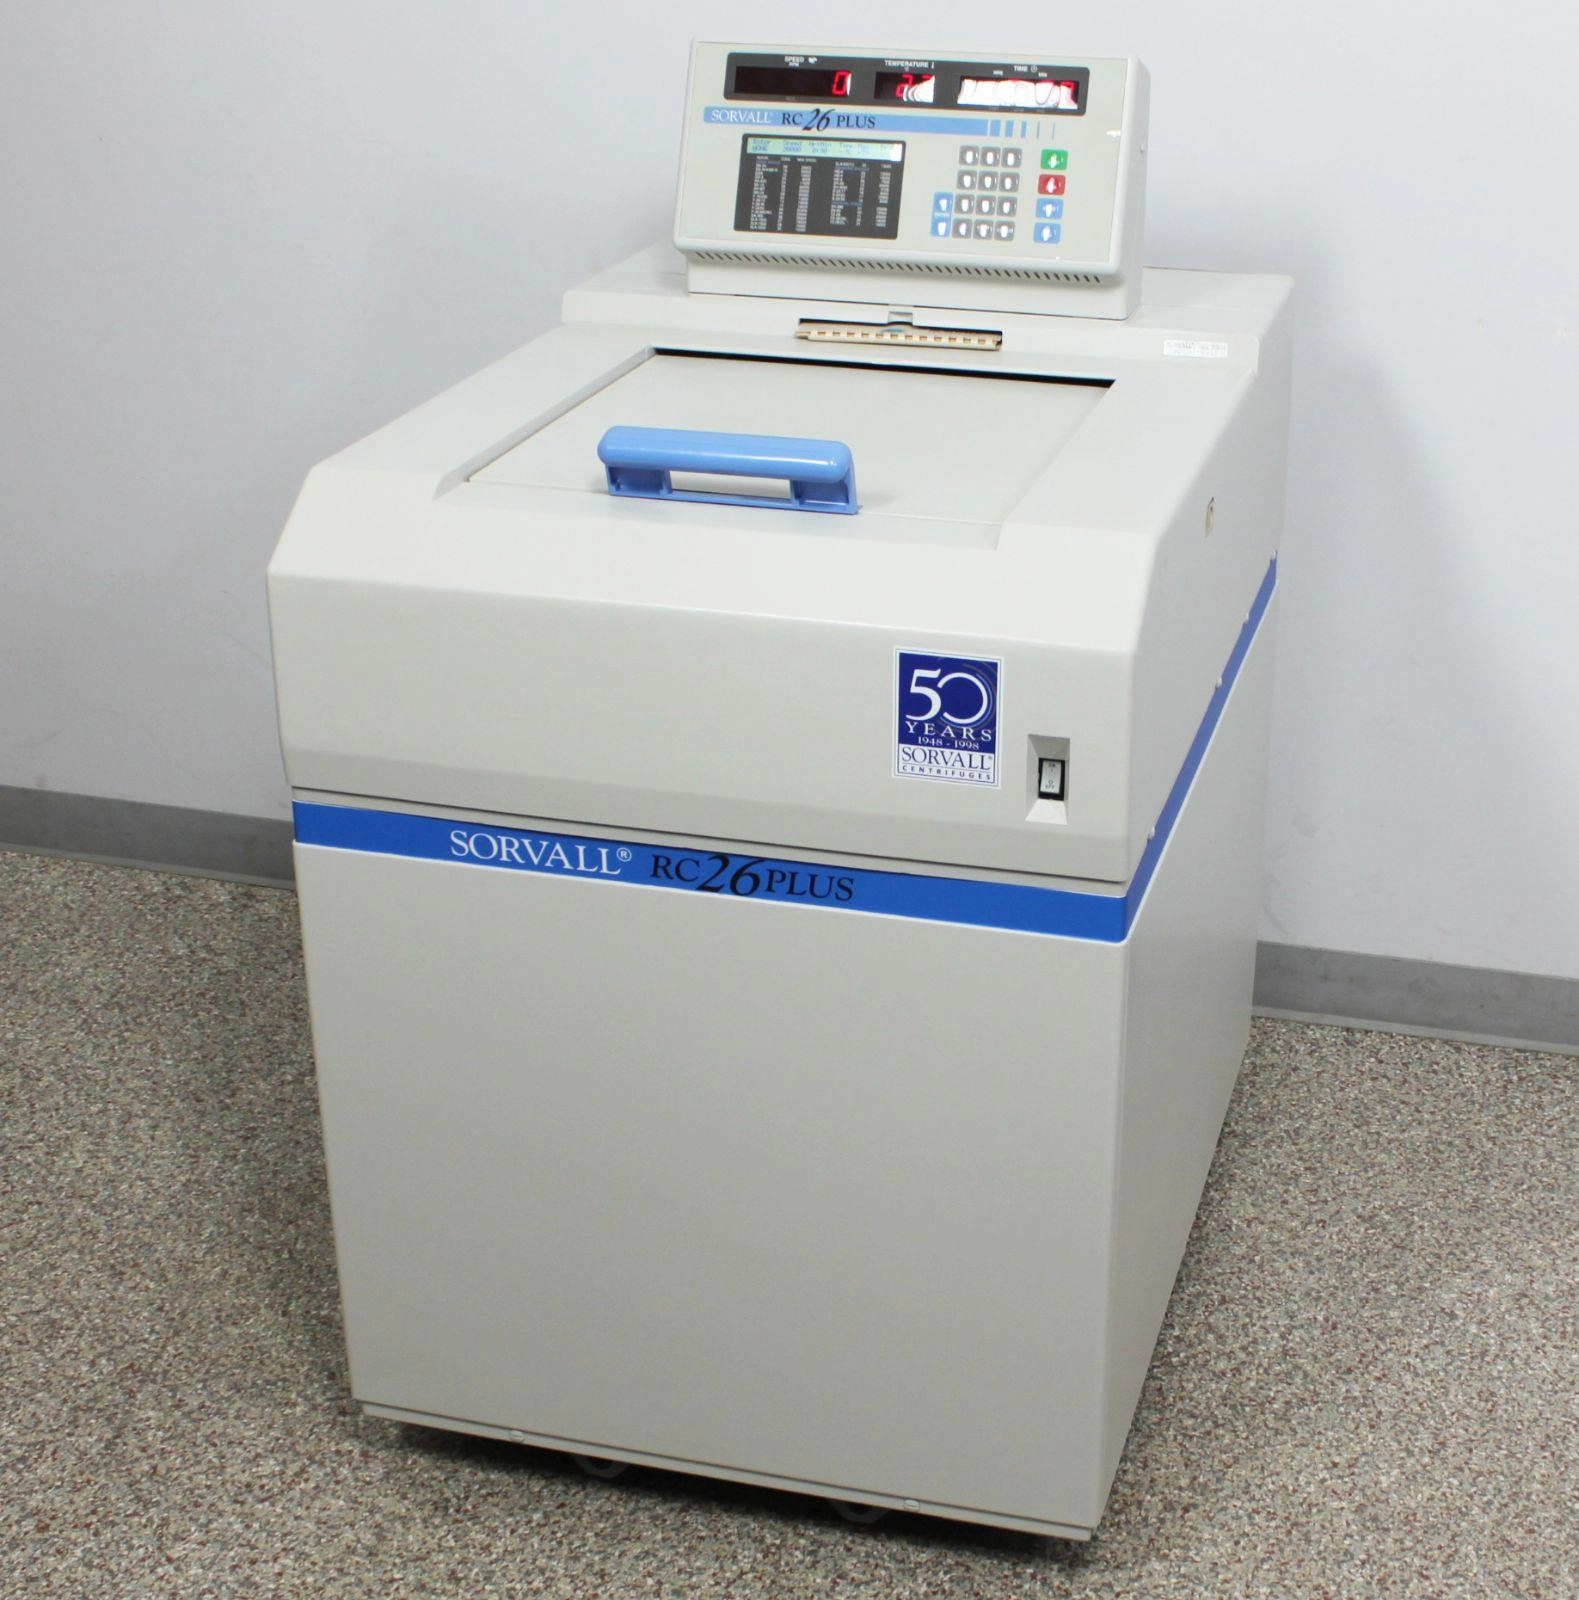 Sorvall RC26 Plus Refrigerated Floor Centrifuge